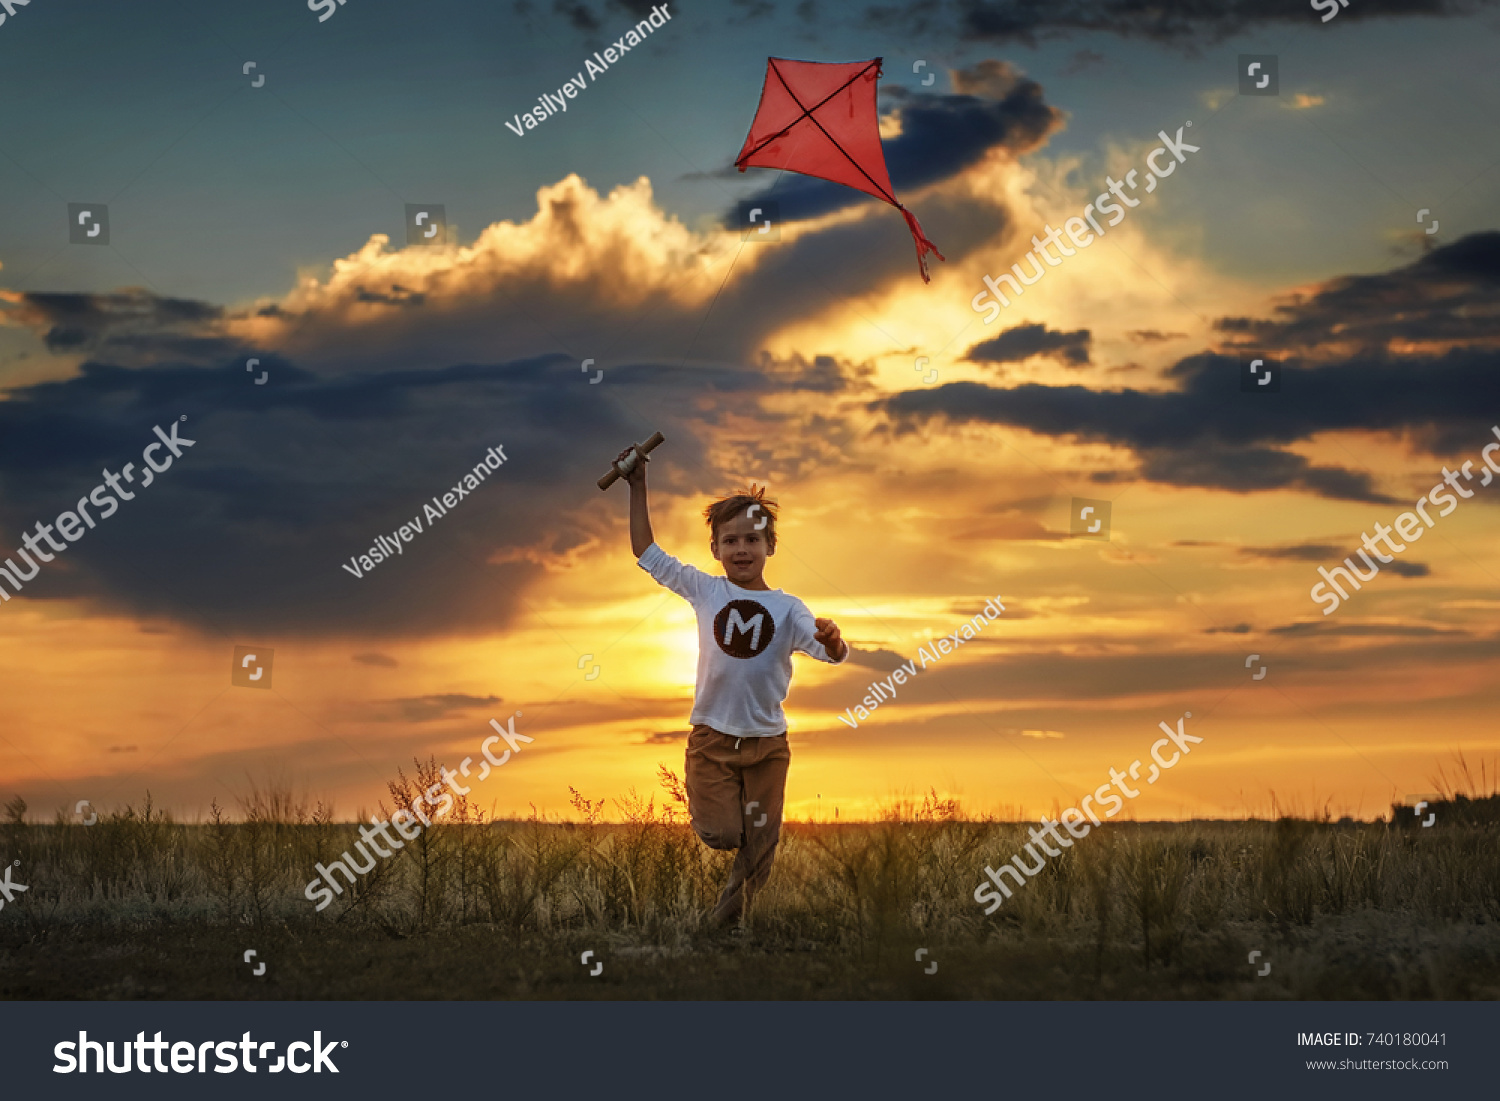 Boy launch a kite in the field at sunset #740180041